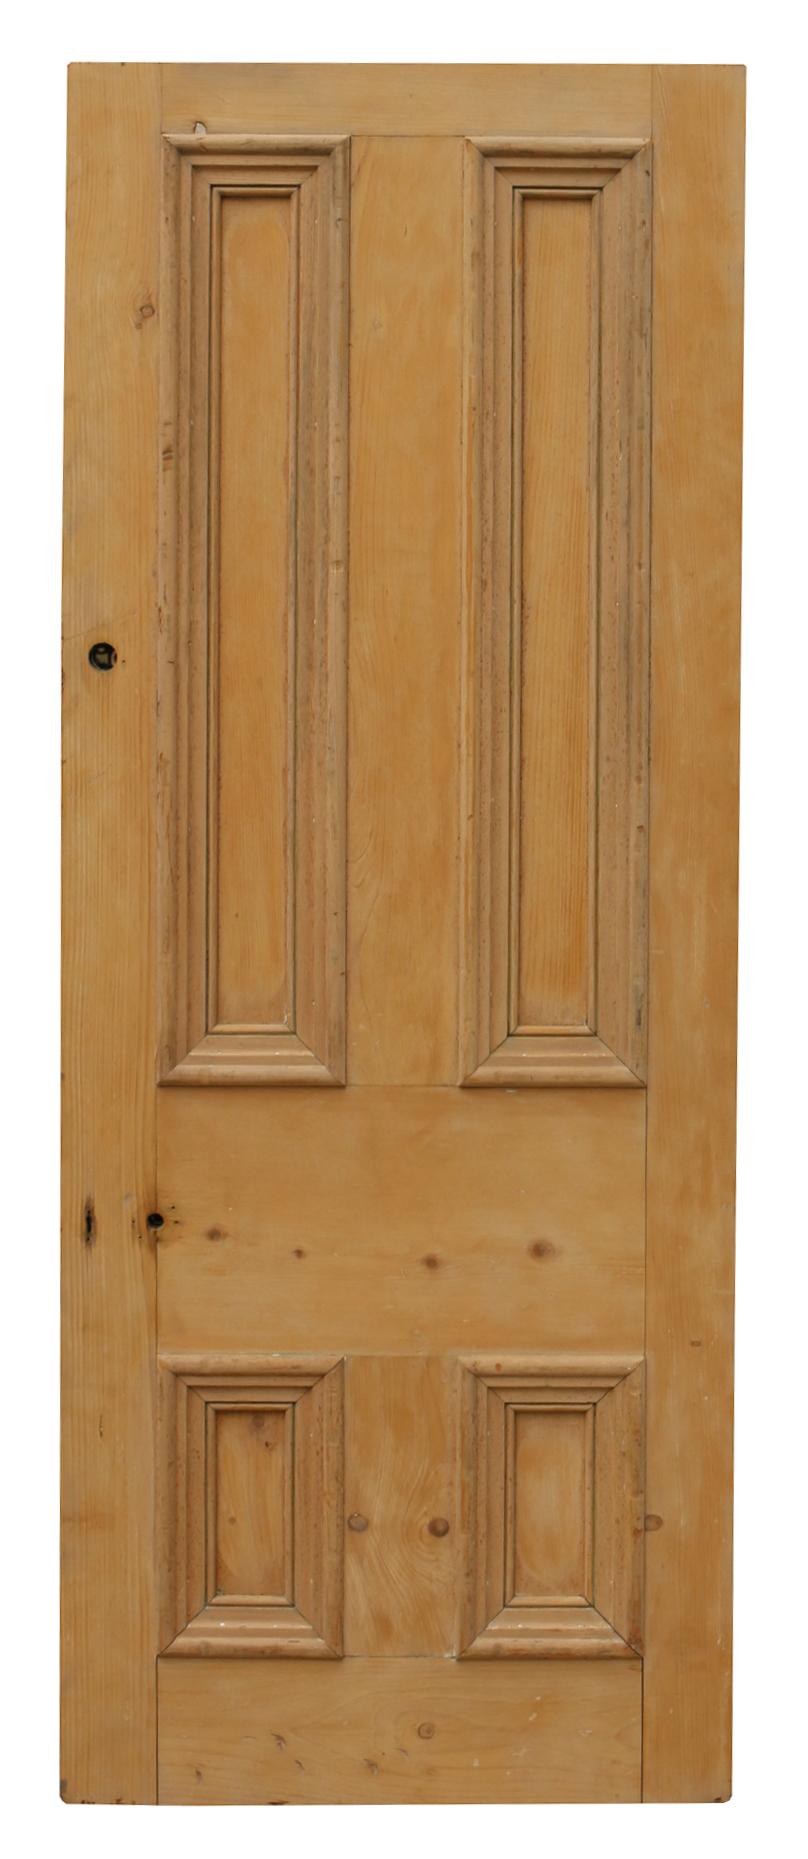 A reclaimed front door constructed from pine.